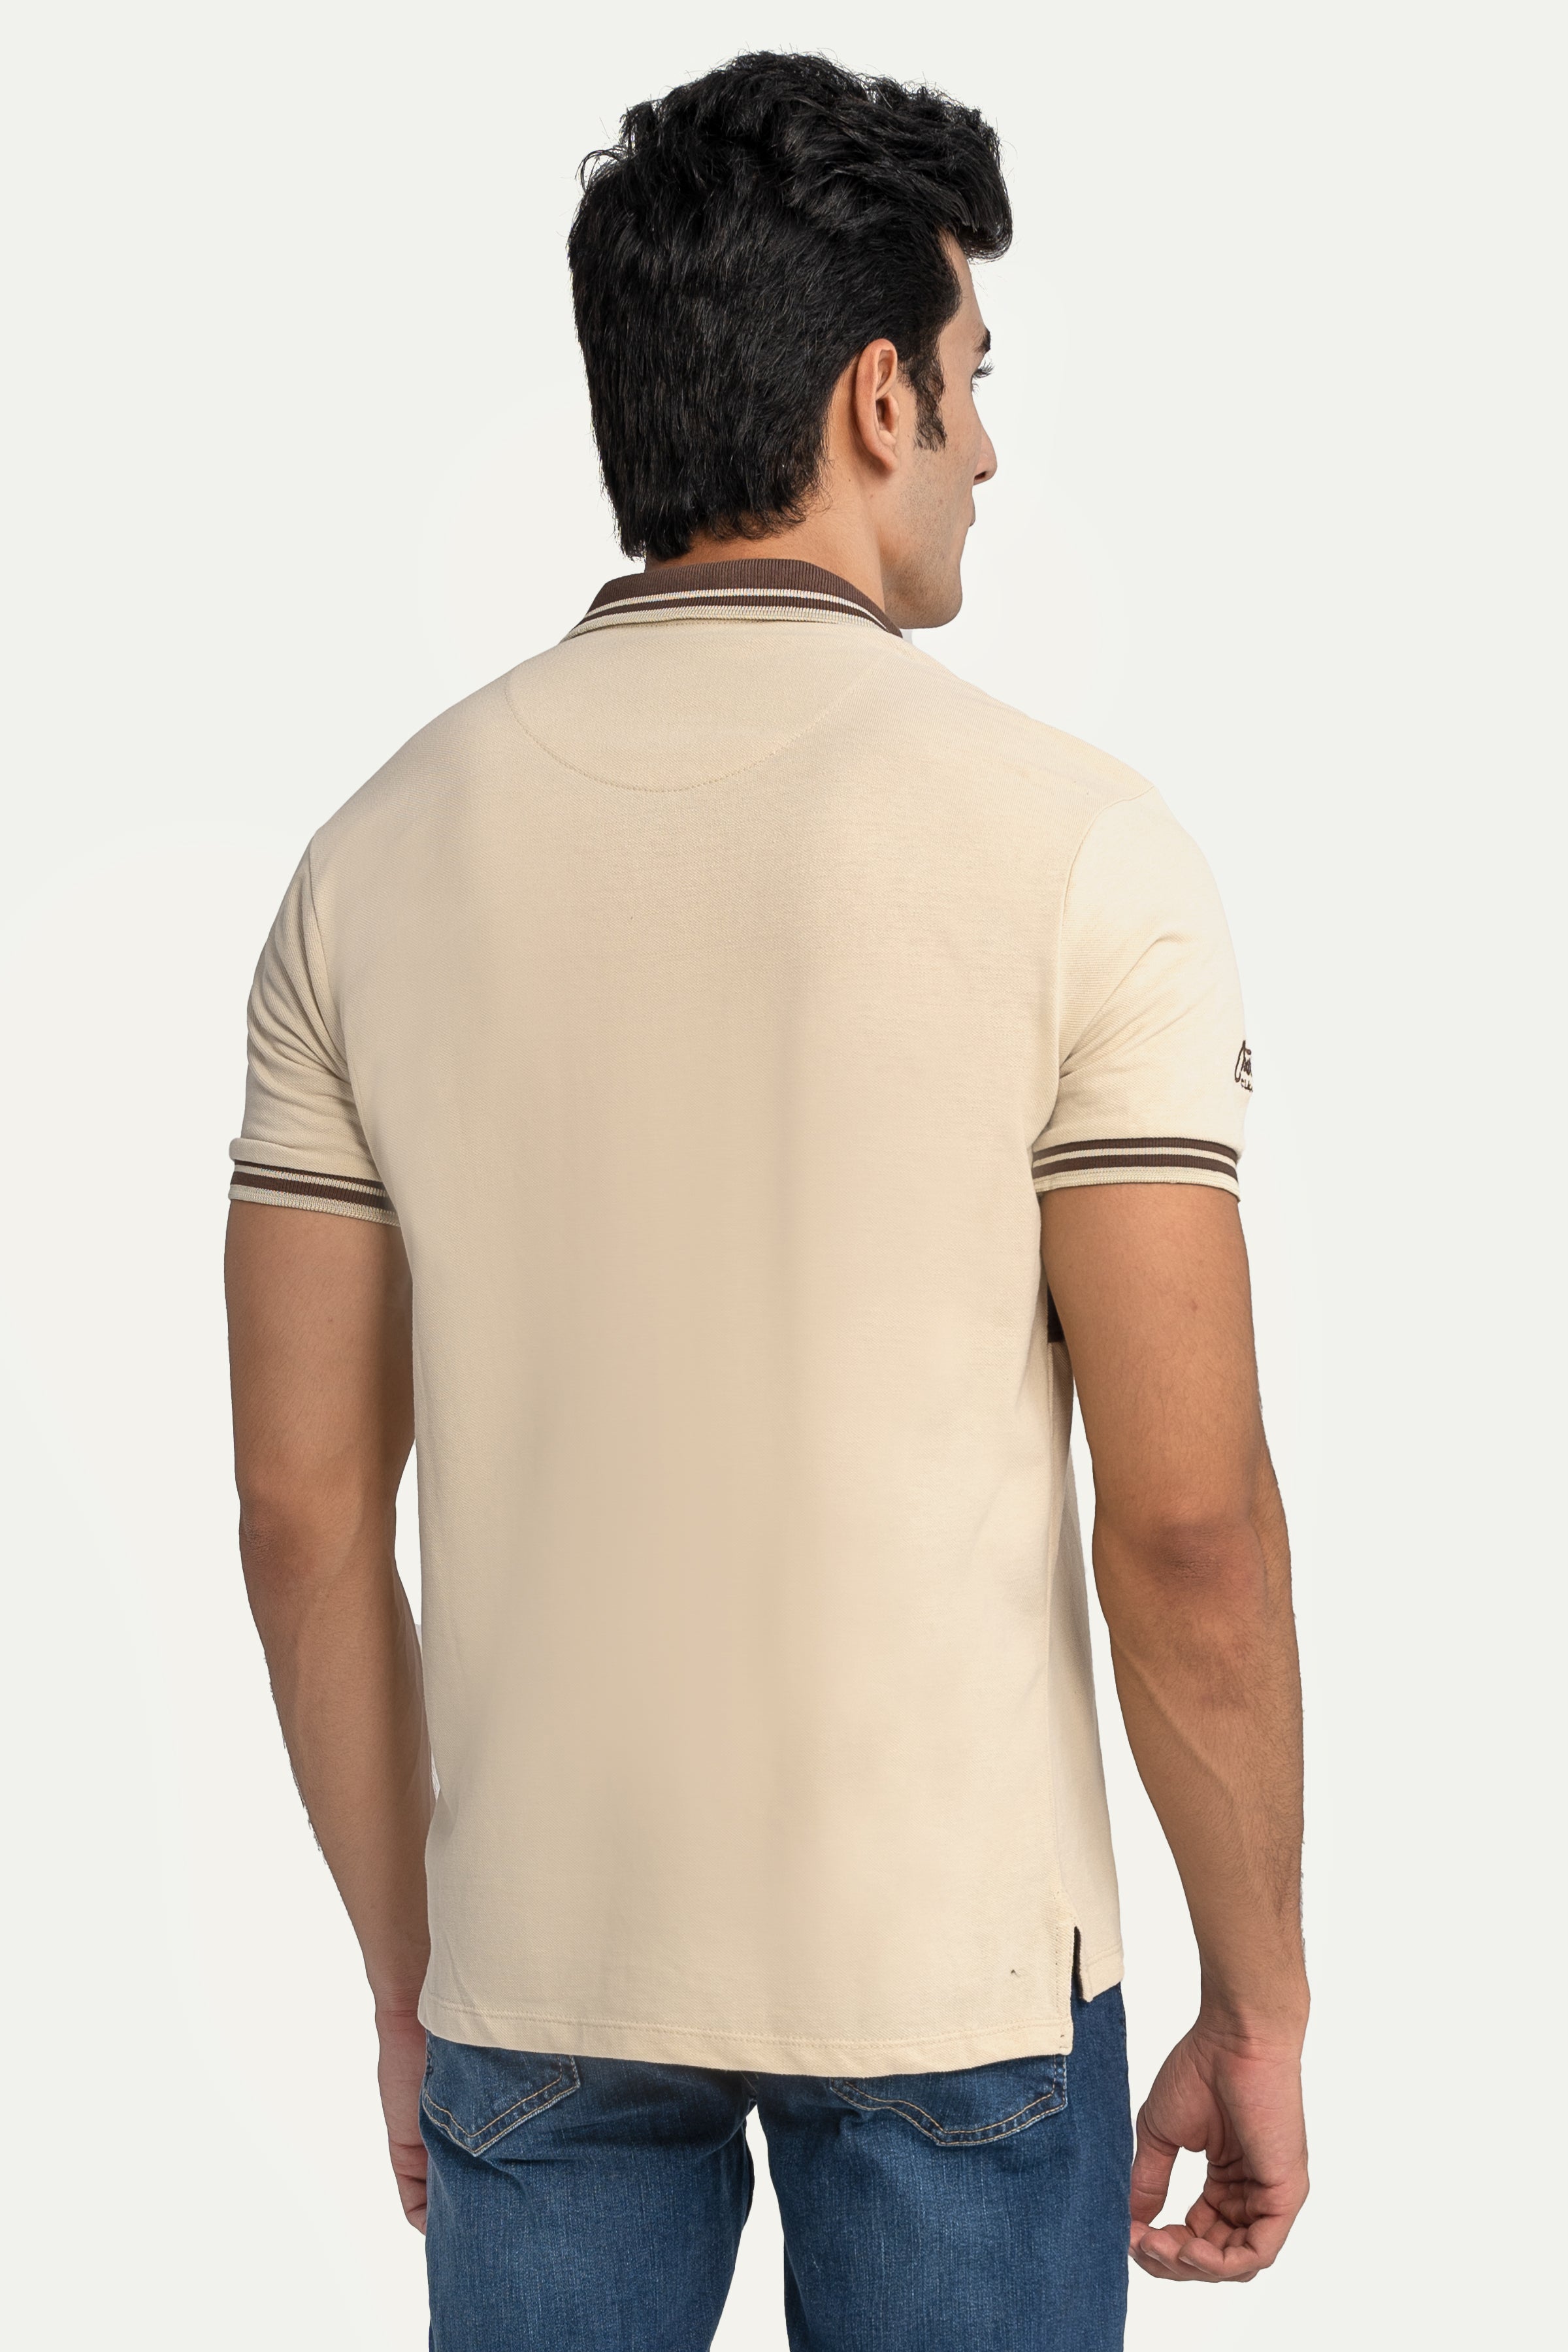 CLASSIC POLO BEIGE BROWN - Charcoal Clothing